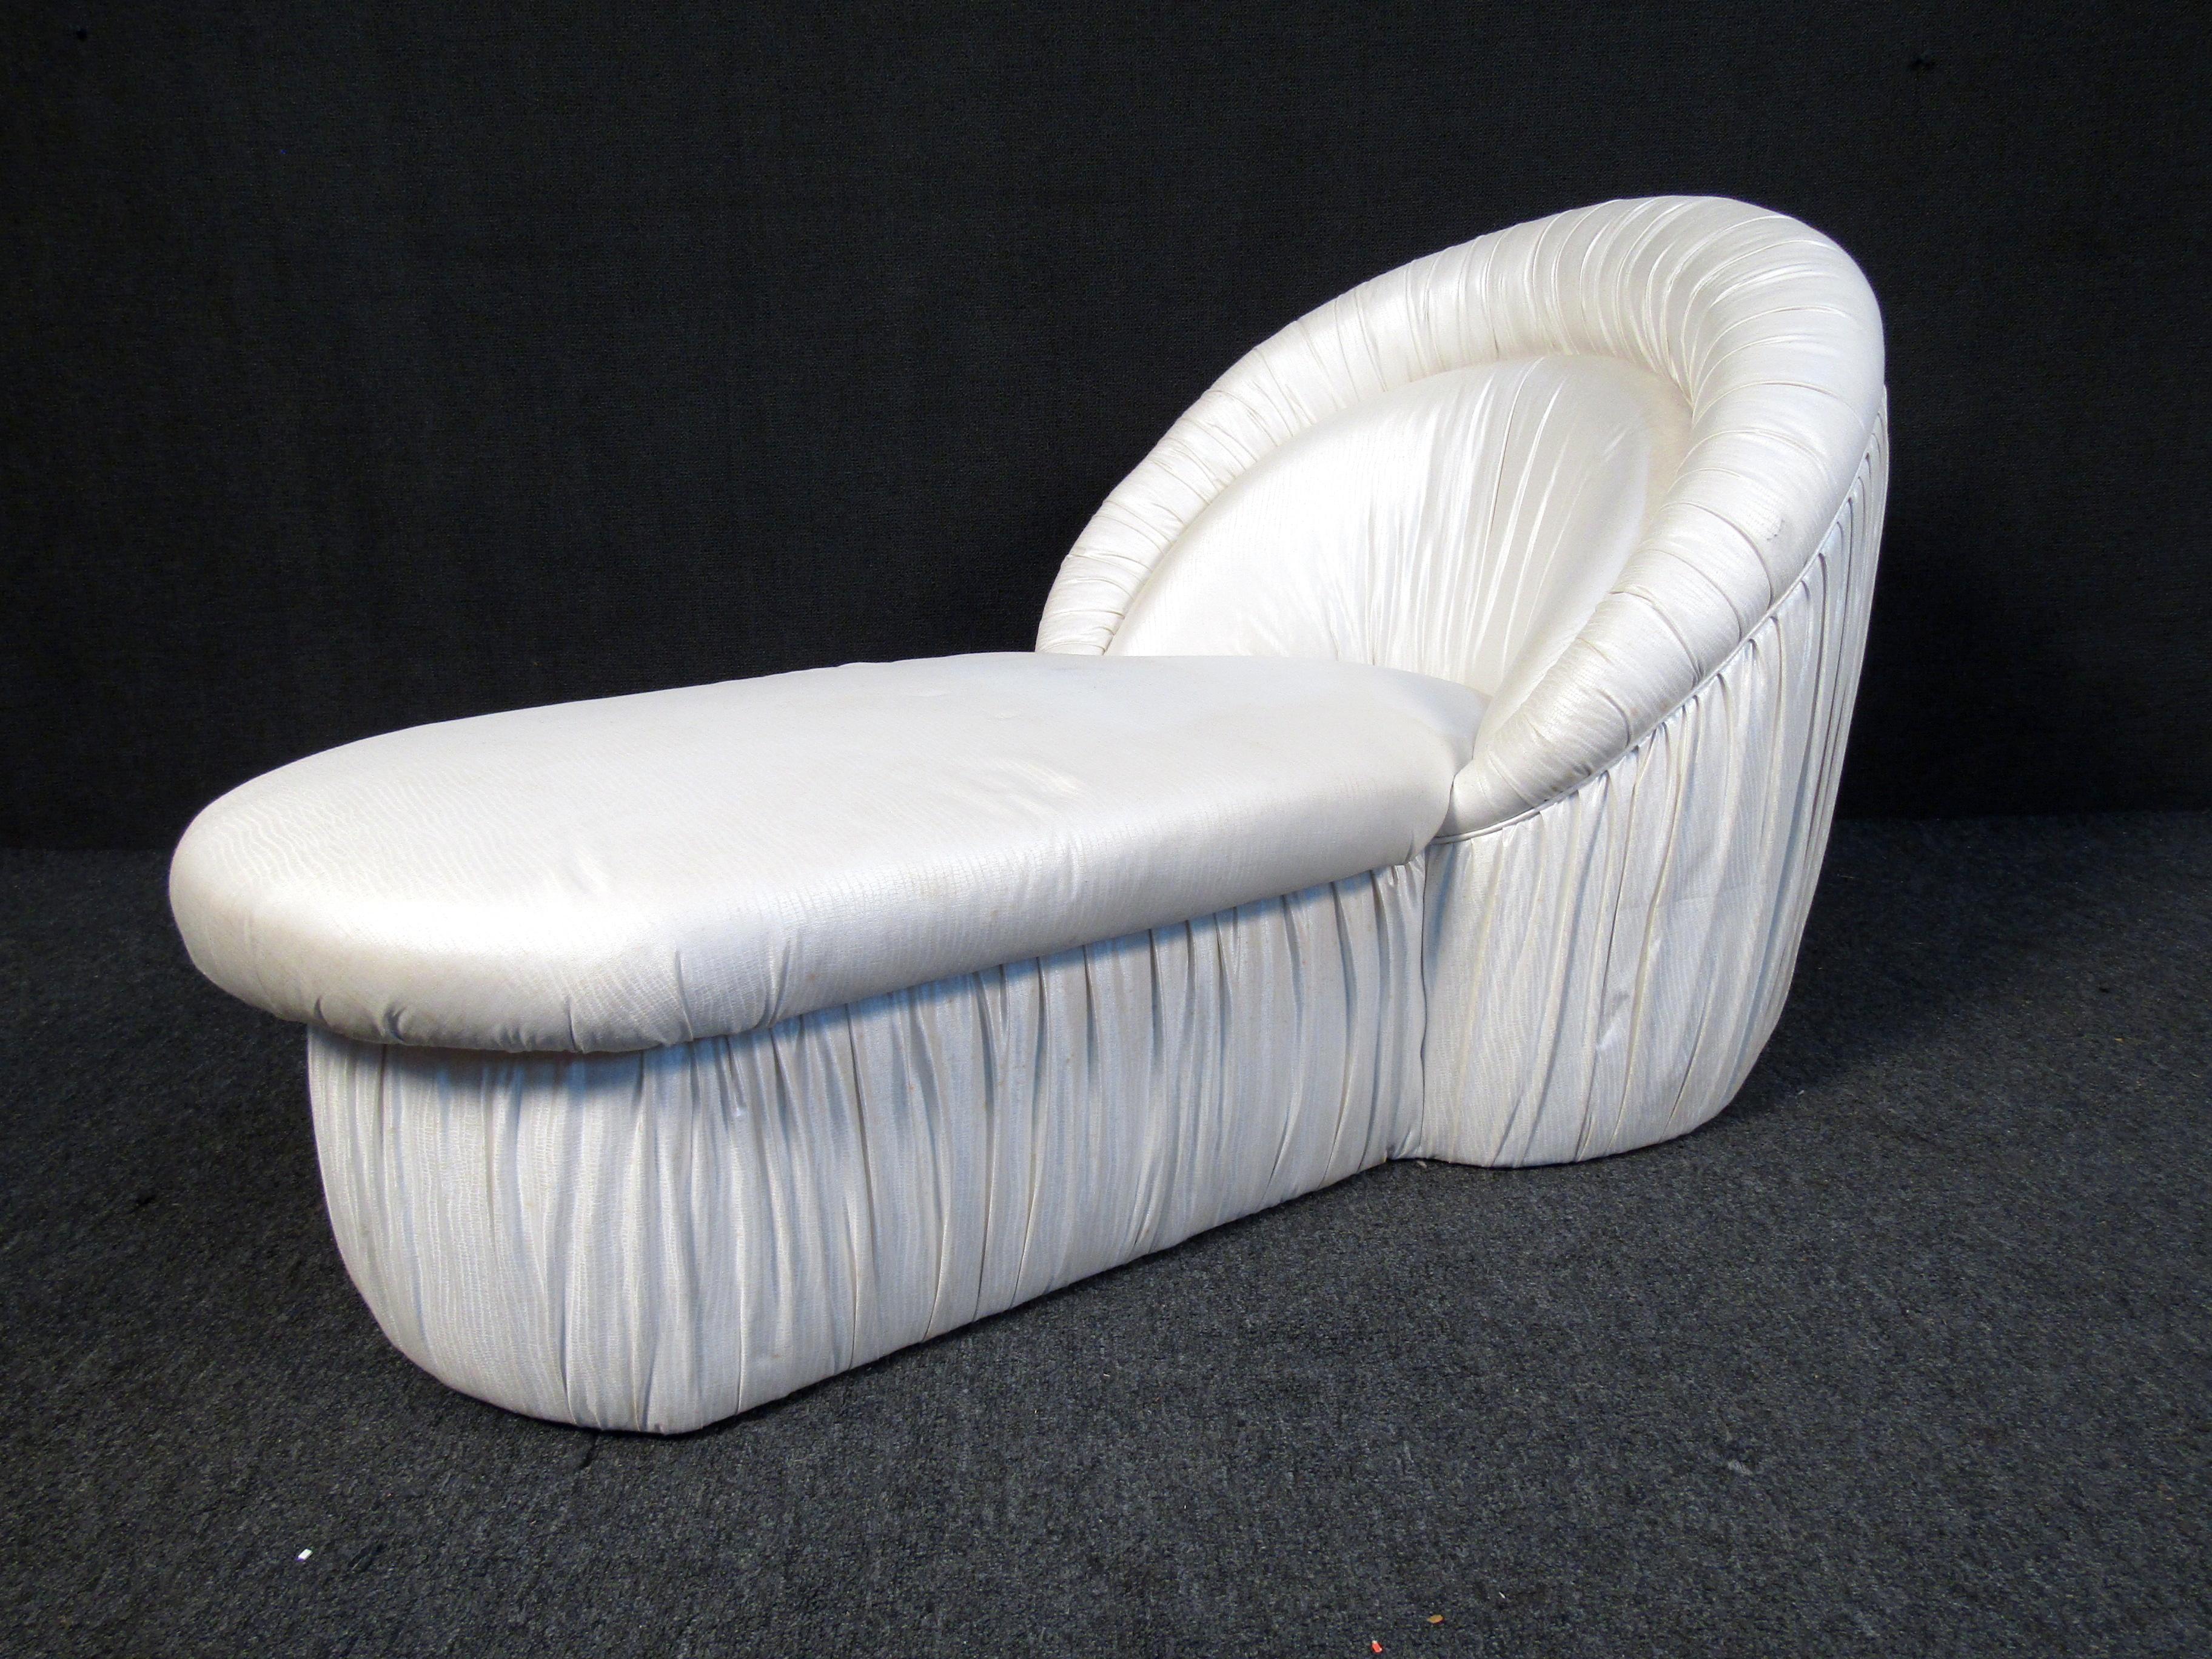 A unique chaise slipper chair featuring a ruffled back and skirt. The top itself has a fixed cushion and cannot be removed.
Please confirm item location (NY or NJ.)